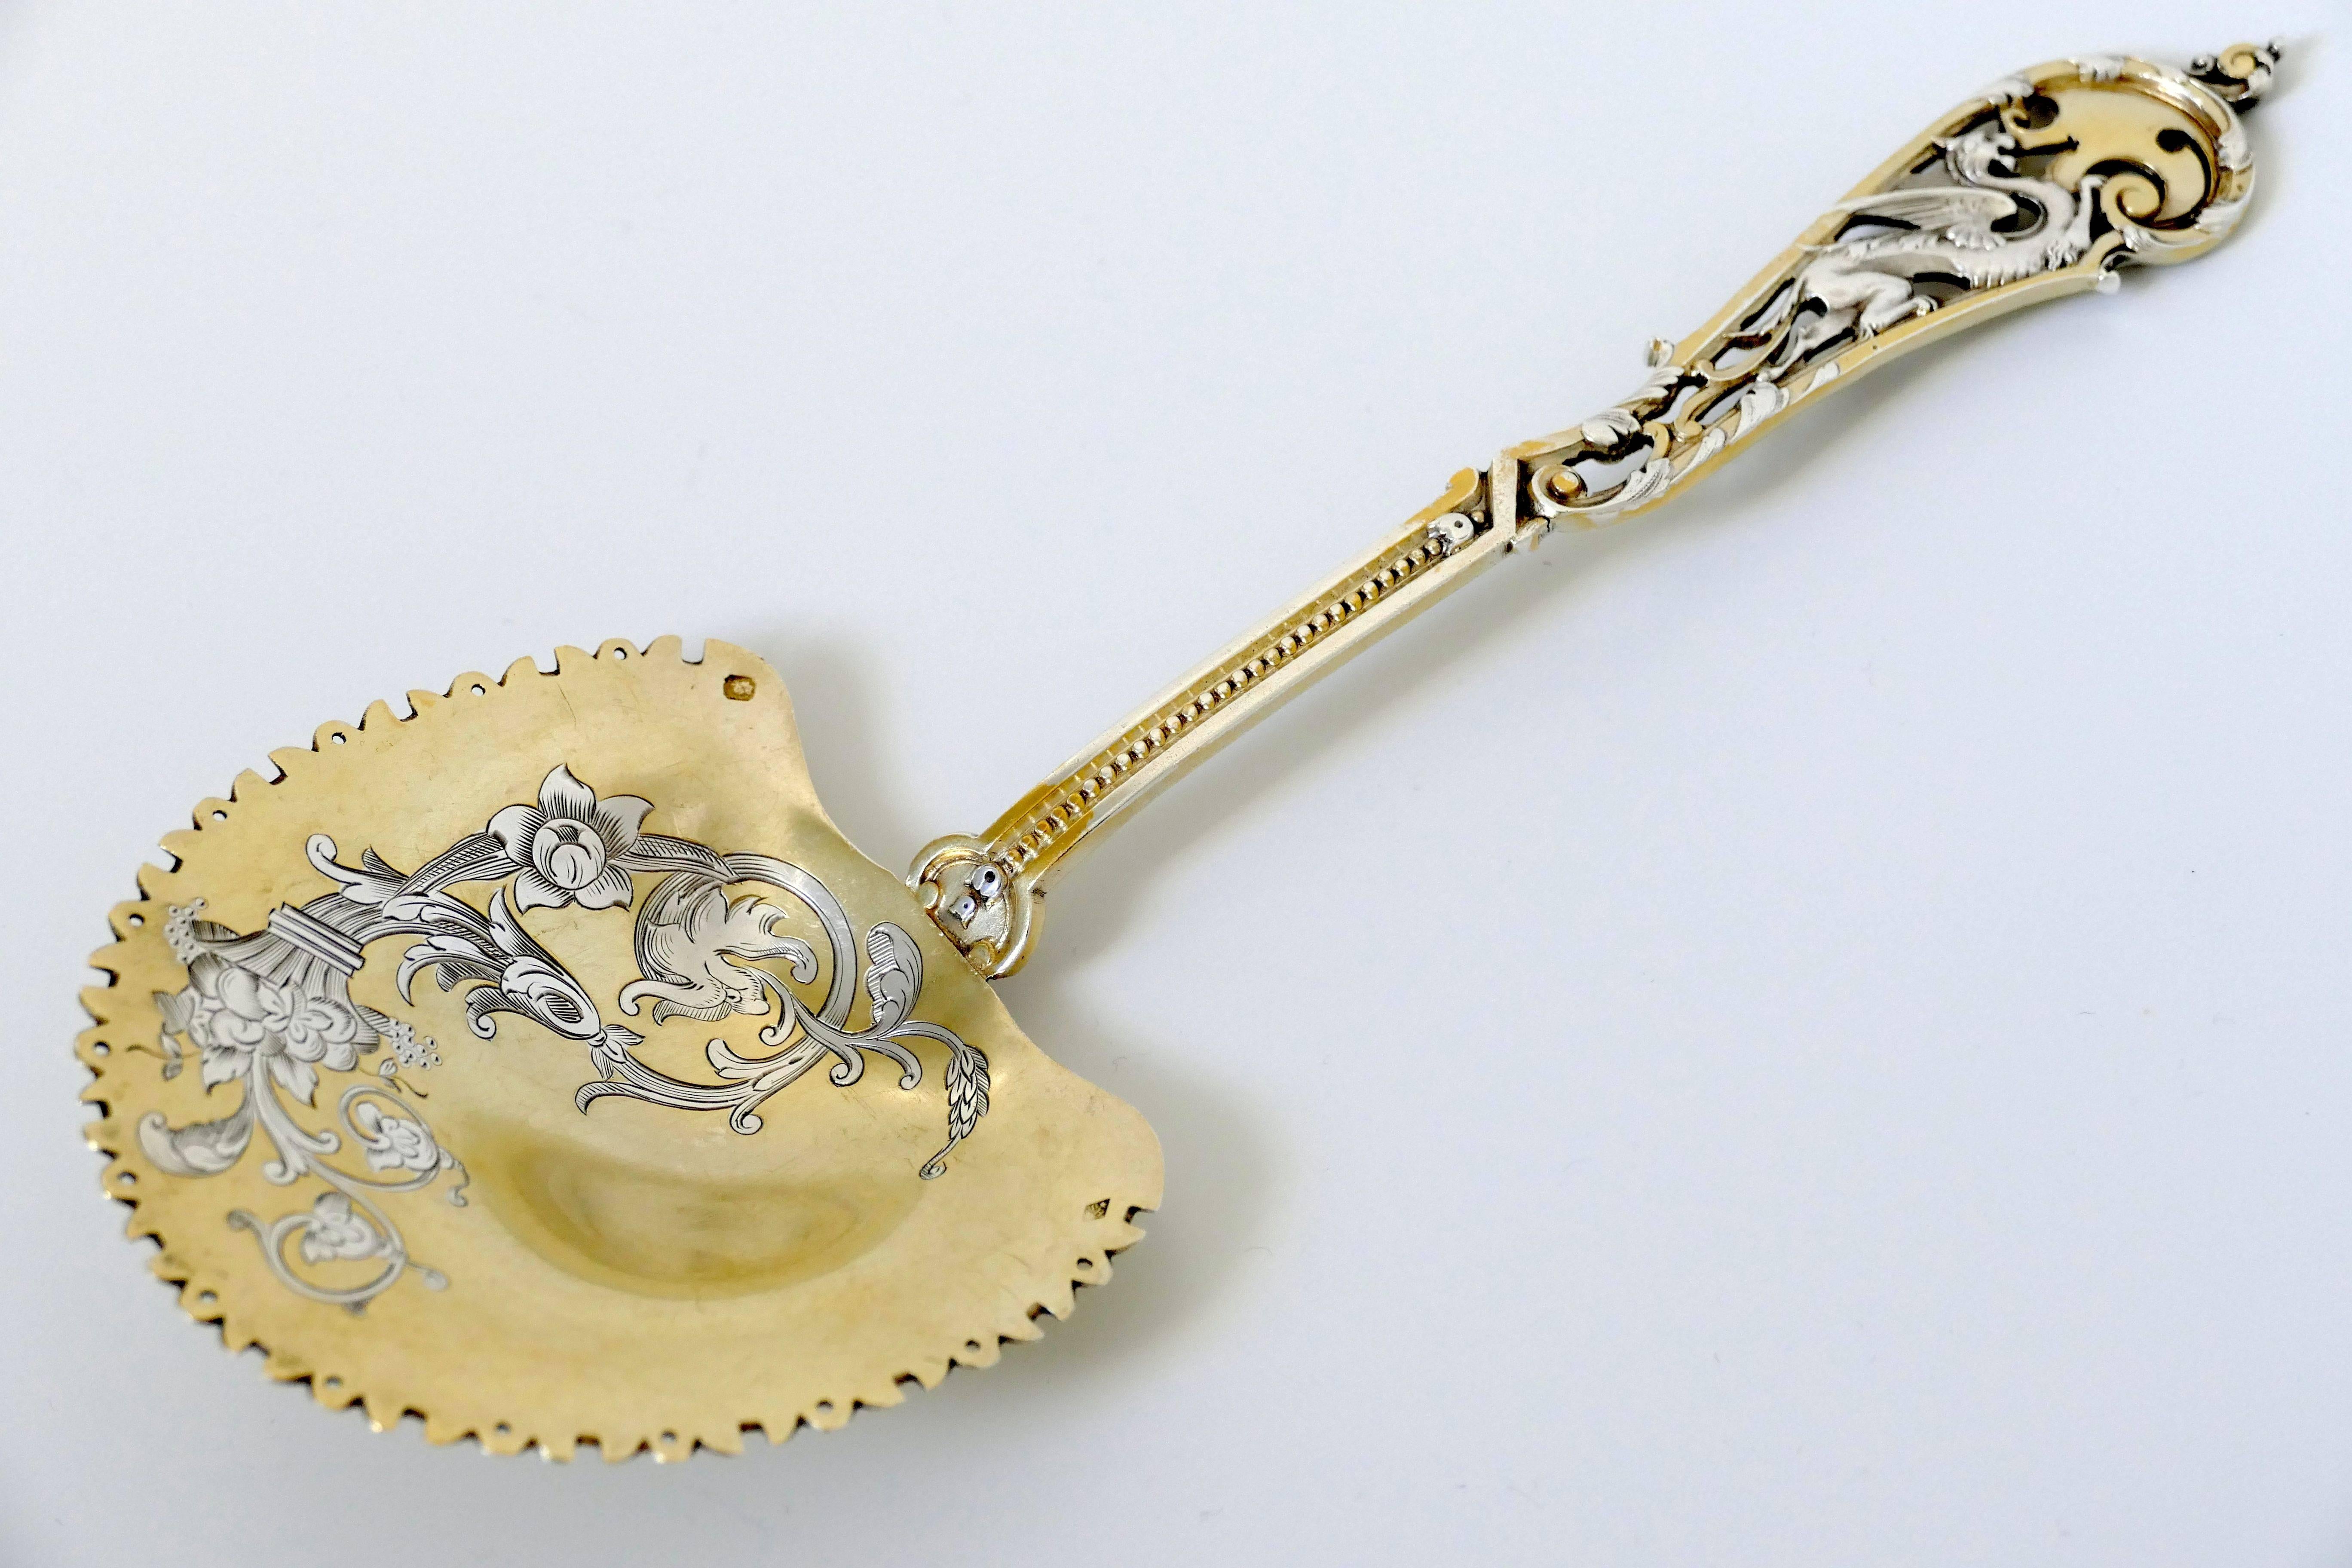 Soufflot Masterpiece Sterling Silver 18-Karat Gold Strawberry Spoon Dragon In Good Condition For Sale In TRIAIZE, PAYS DE LOIRE